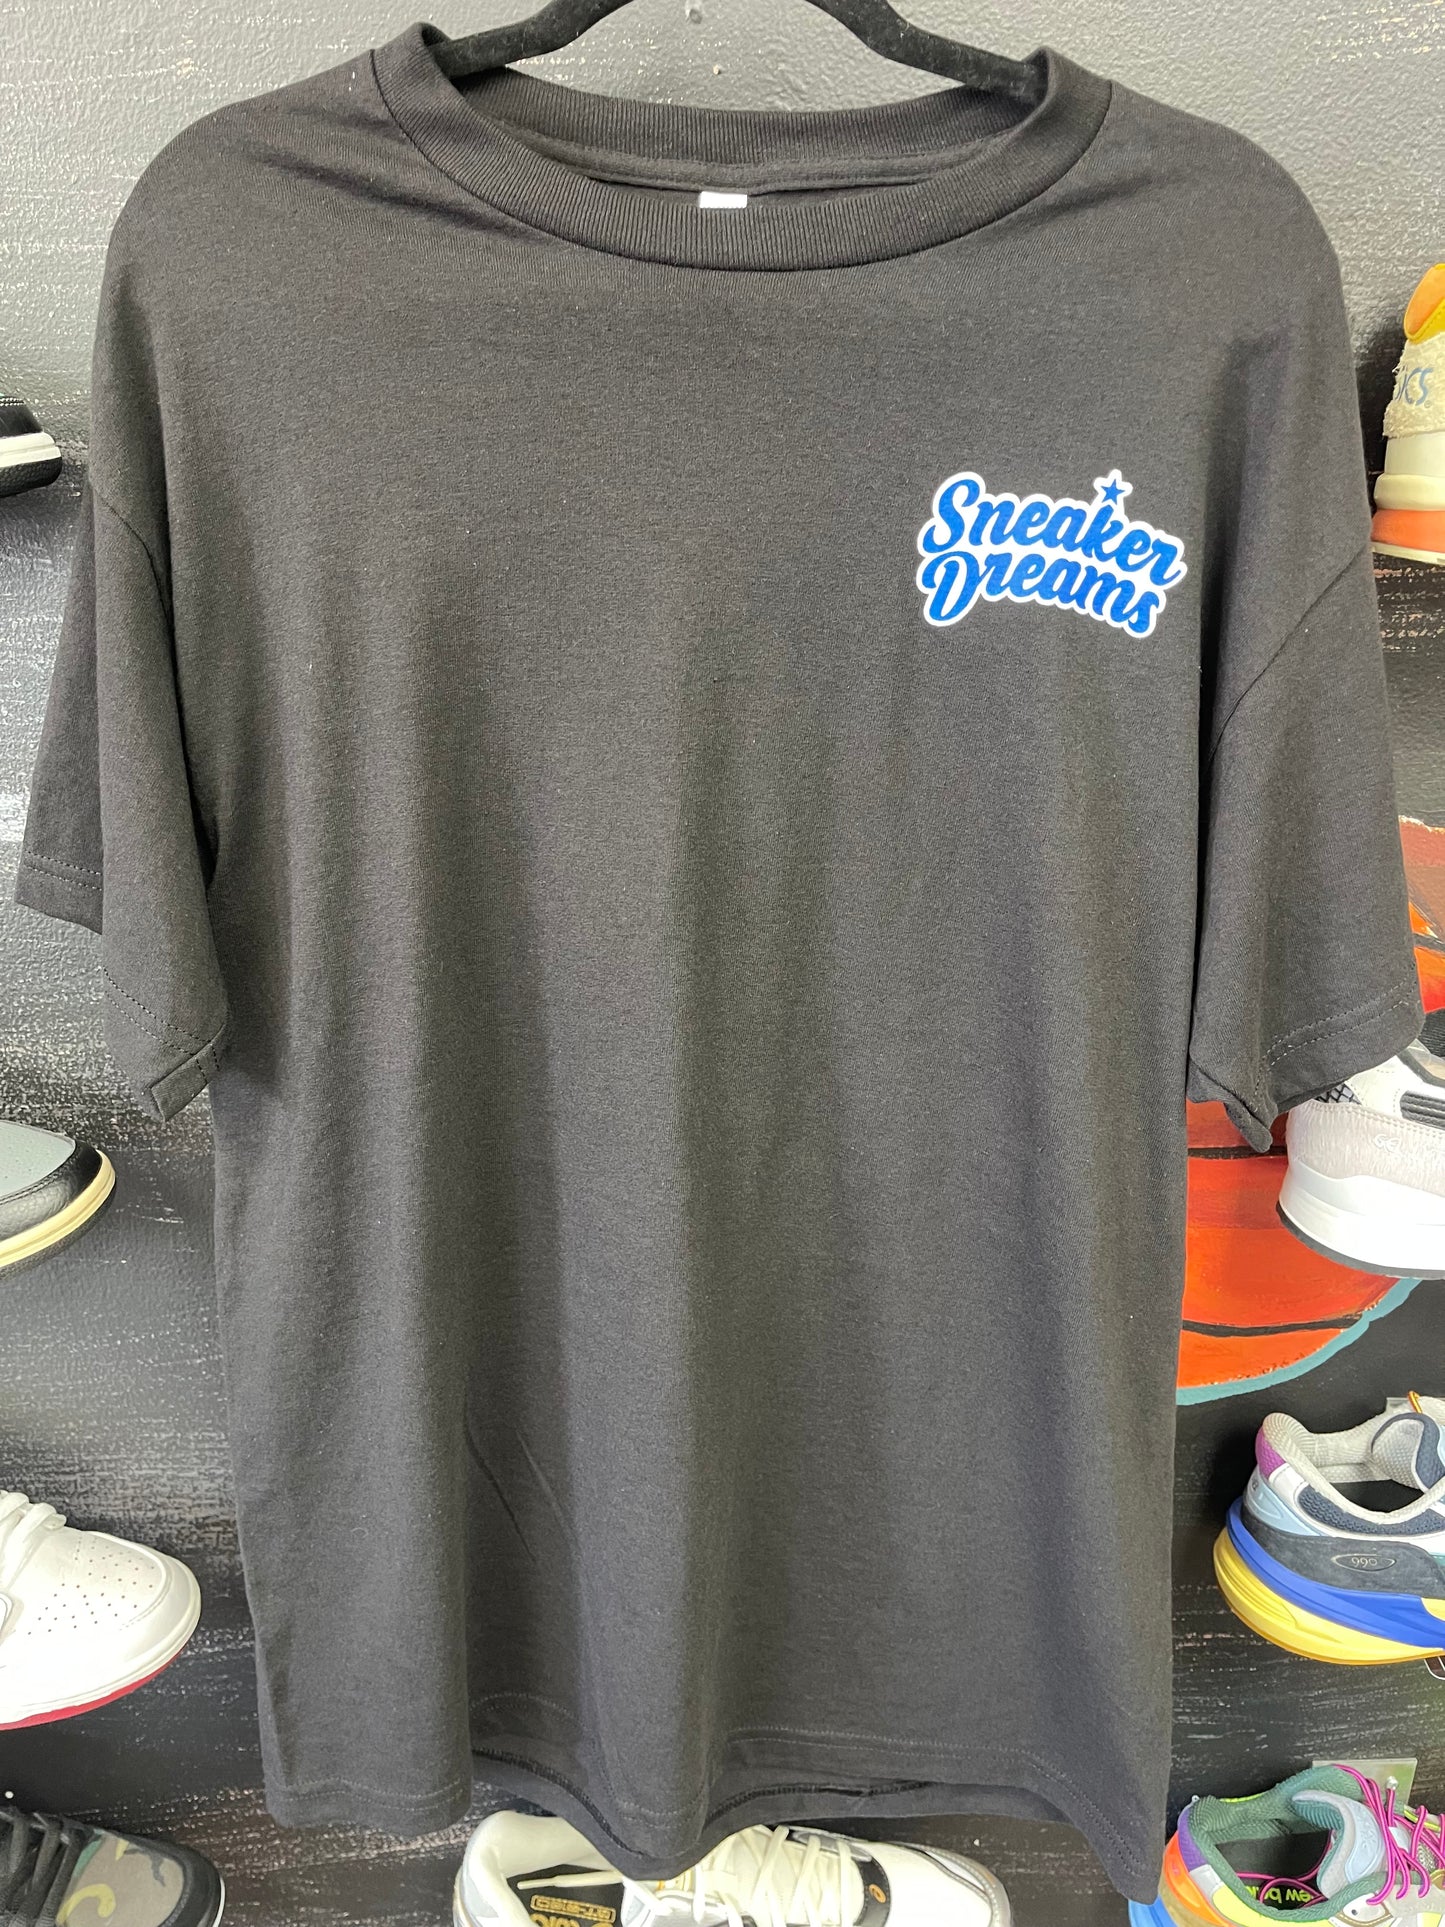 Sneakerdreams T shirt  size Large